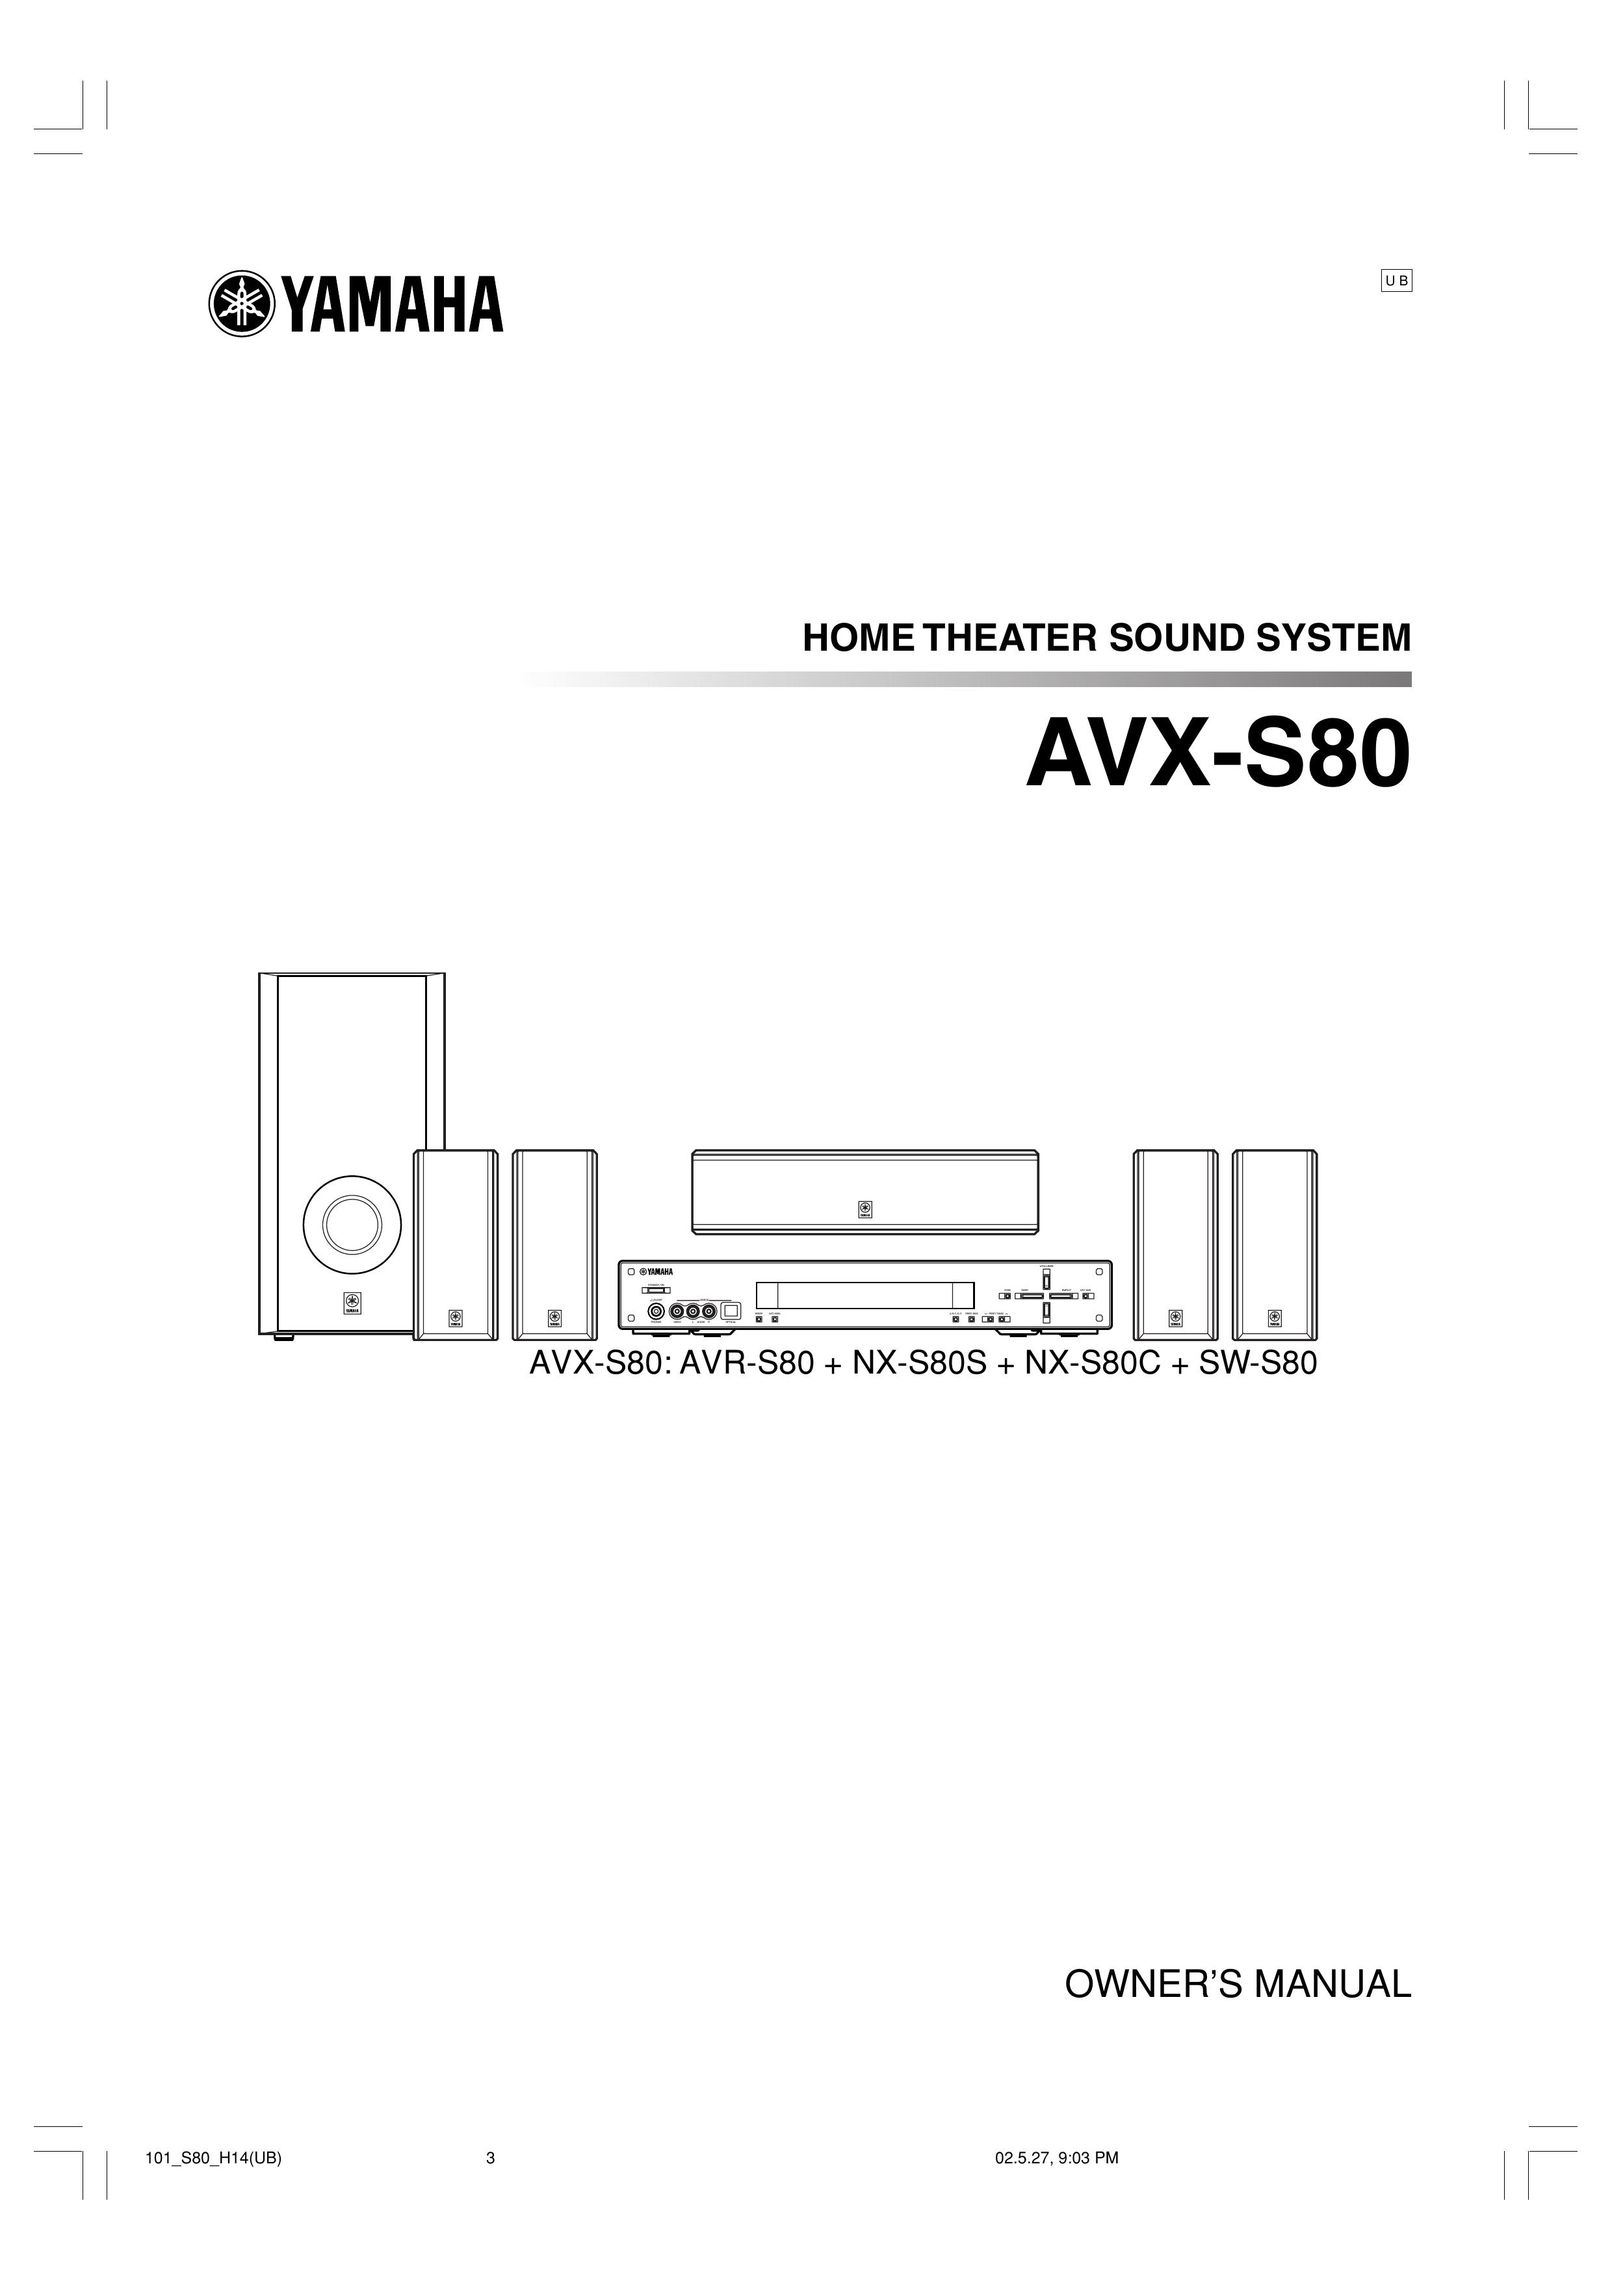 Yamaha AVX-S80 Home Theater System User Manual